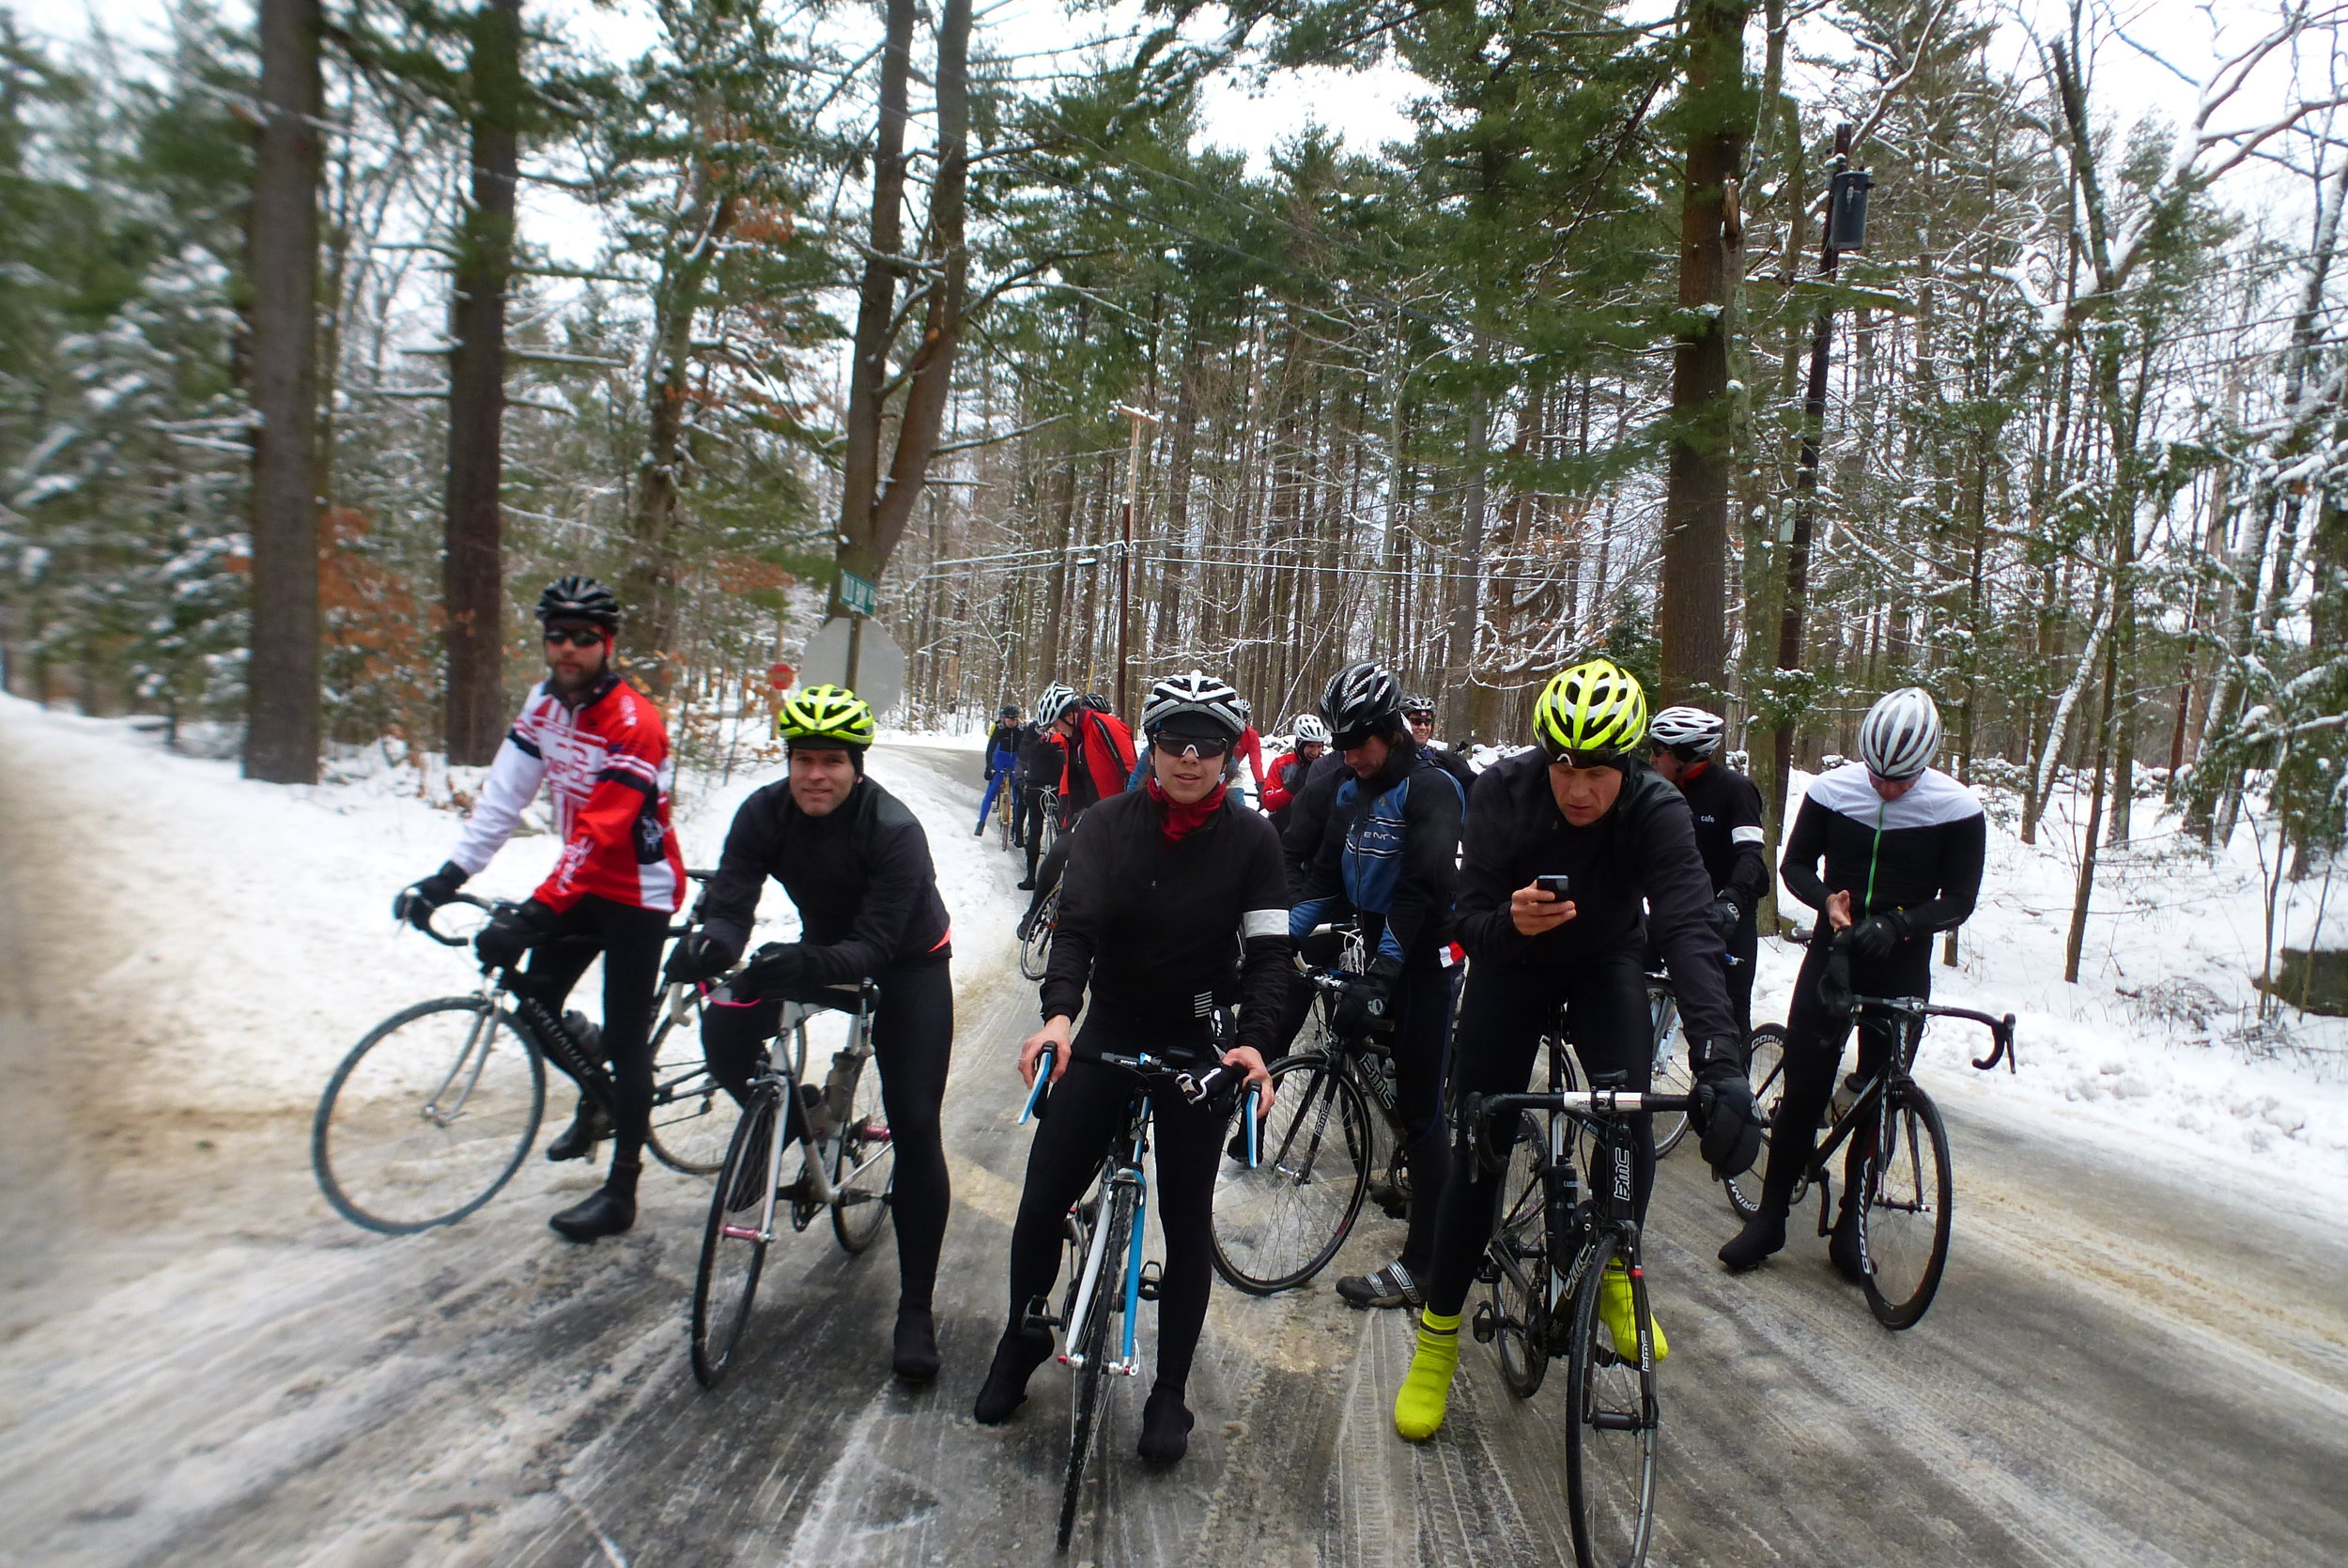 Saturday big group ride with Rapha's Rich Bravo & Derrick Lewis - Photo by Neil McInnis